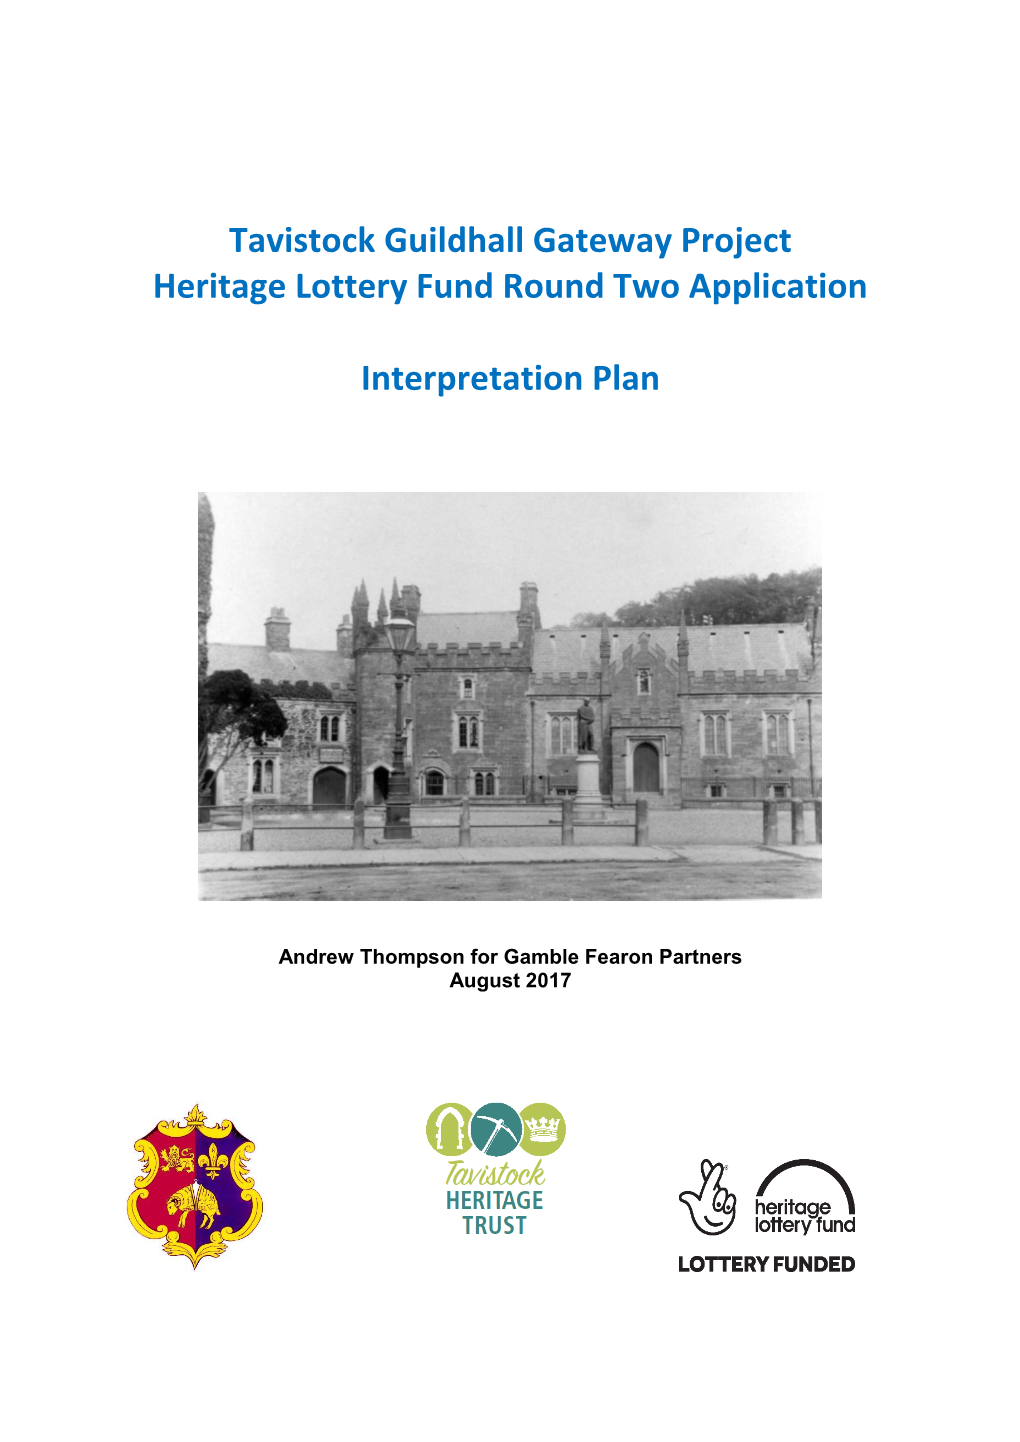 Tavistock Guildhall Gateway Project Heritage Lottery Fund Round Two Application